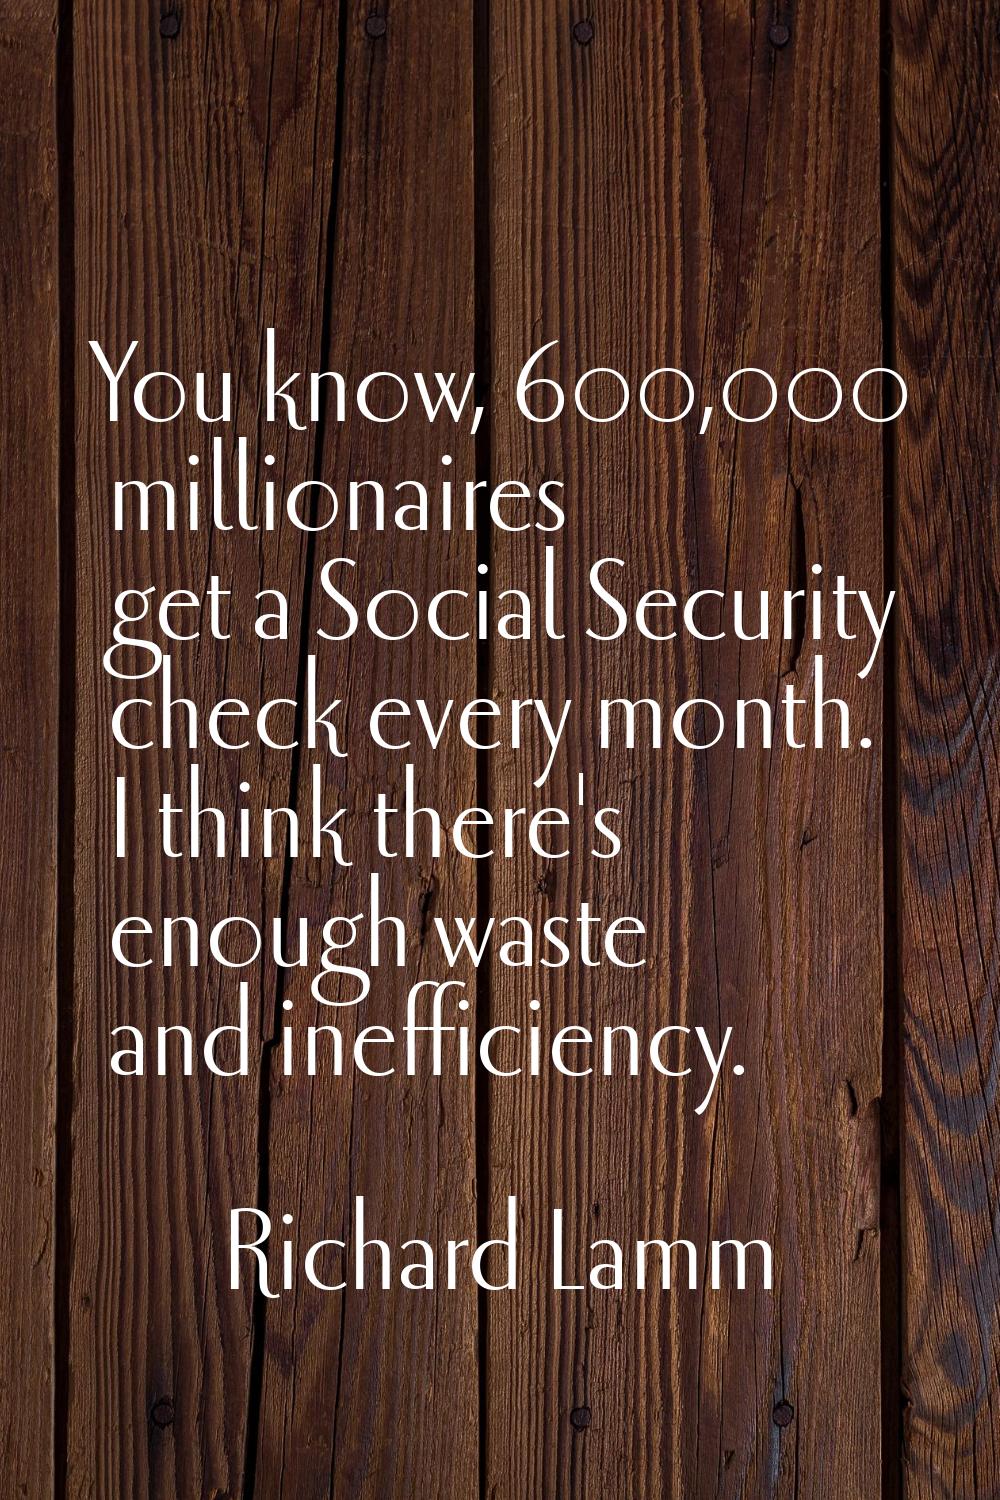 You know, 600,000 millionaires get a Social Security check every month. I think there's enough wast